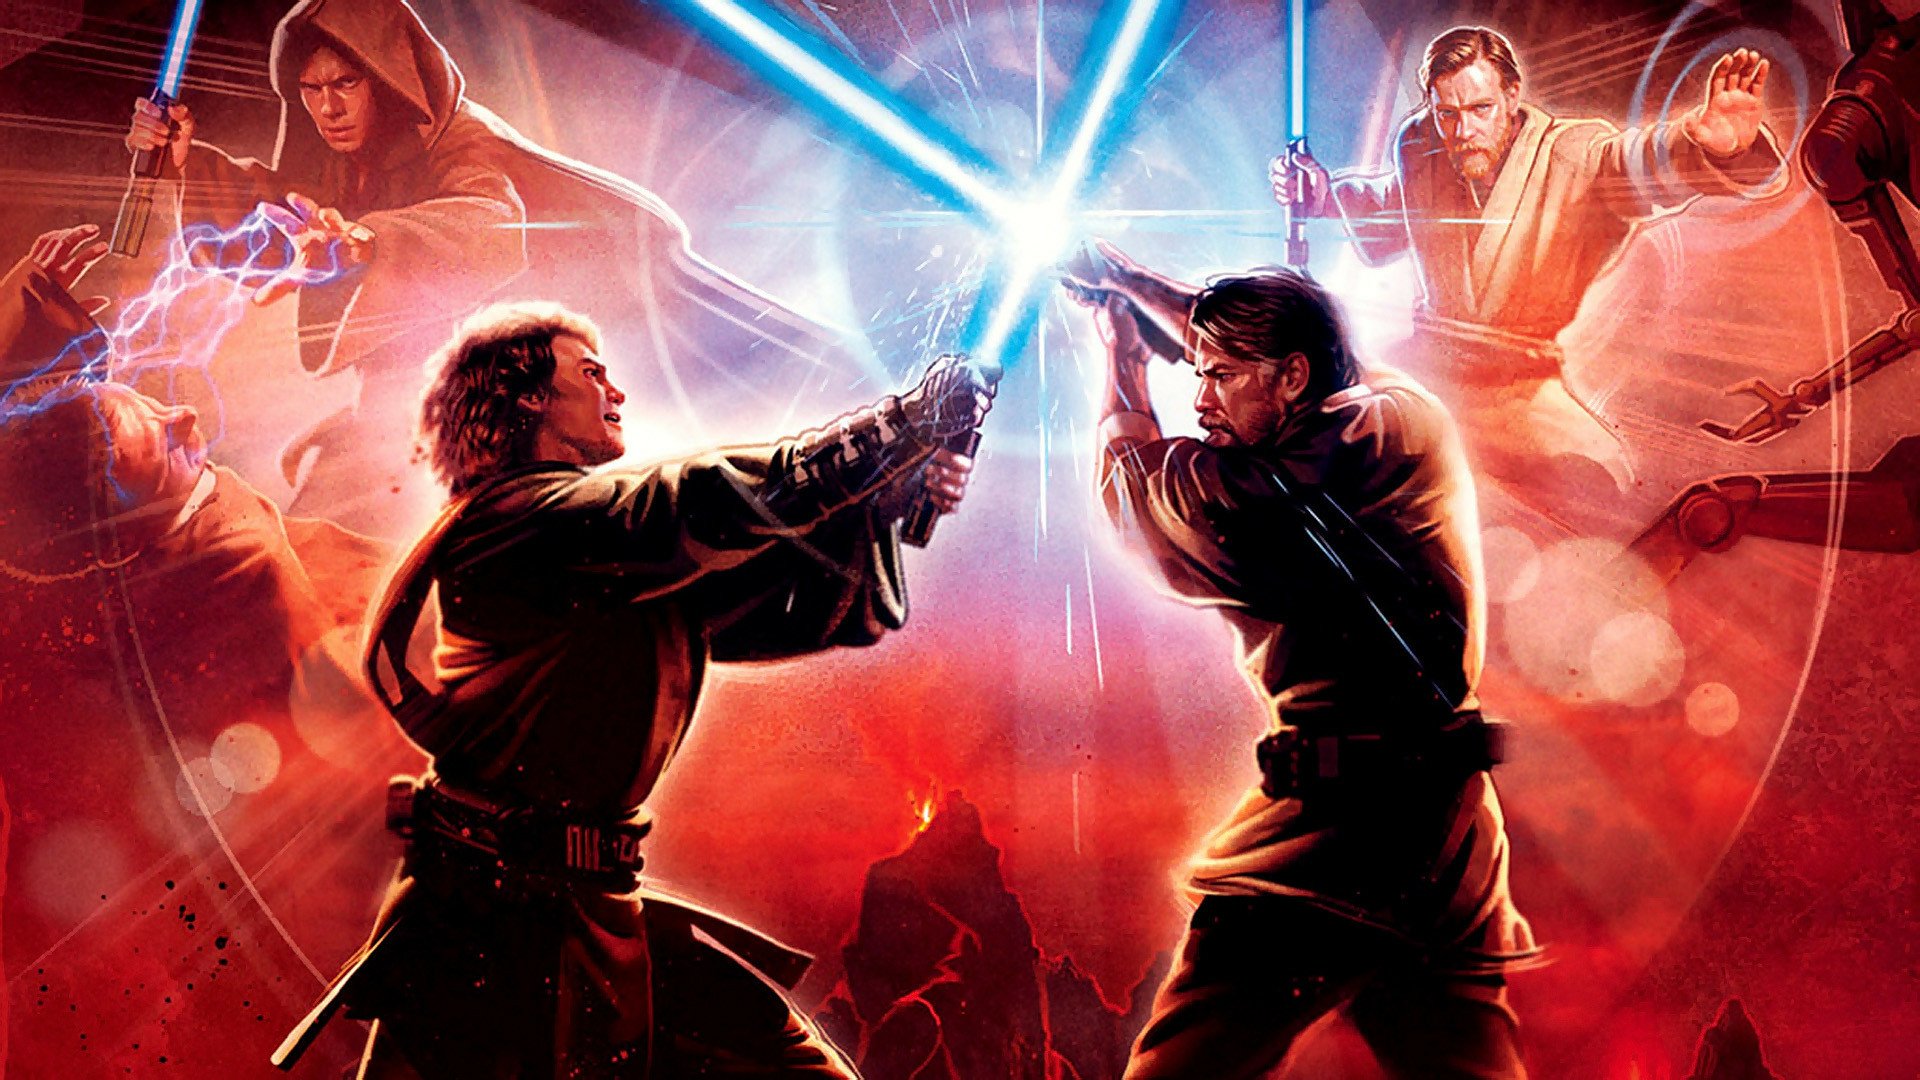 Star Wars Ep. III: Revenge of the Sith download the new for mac